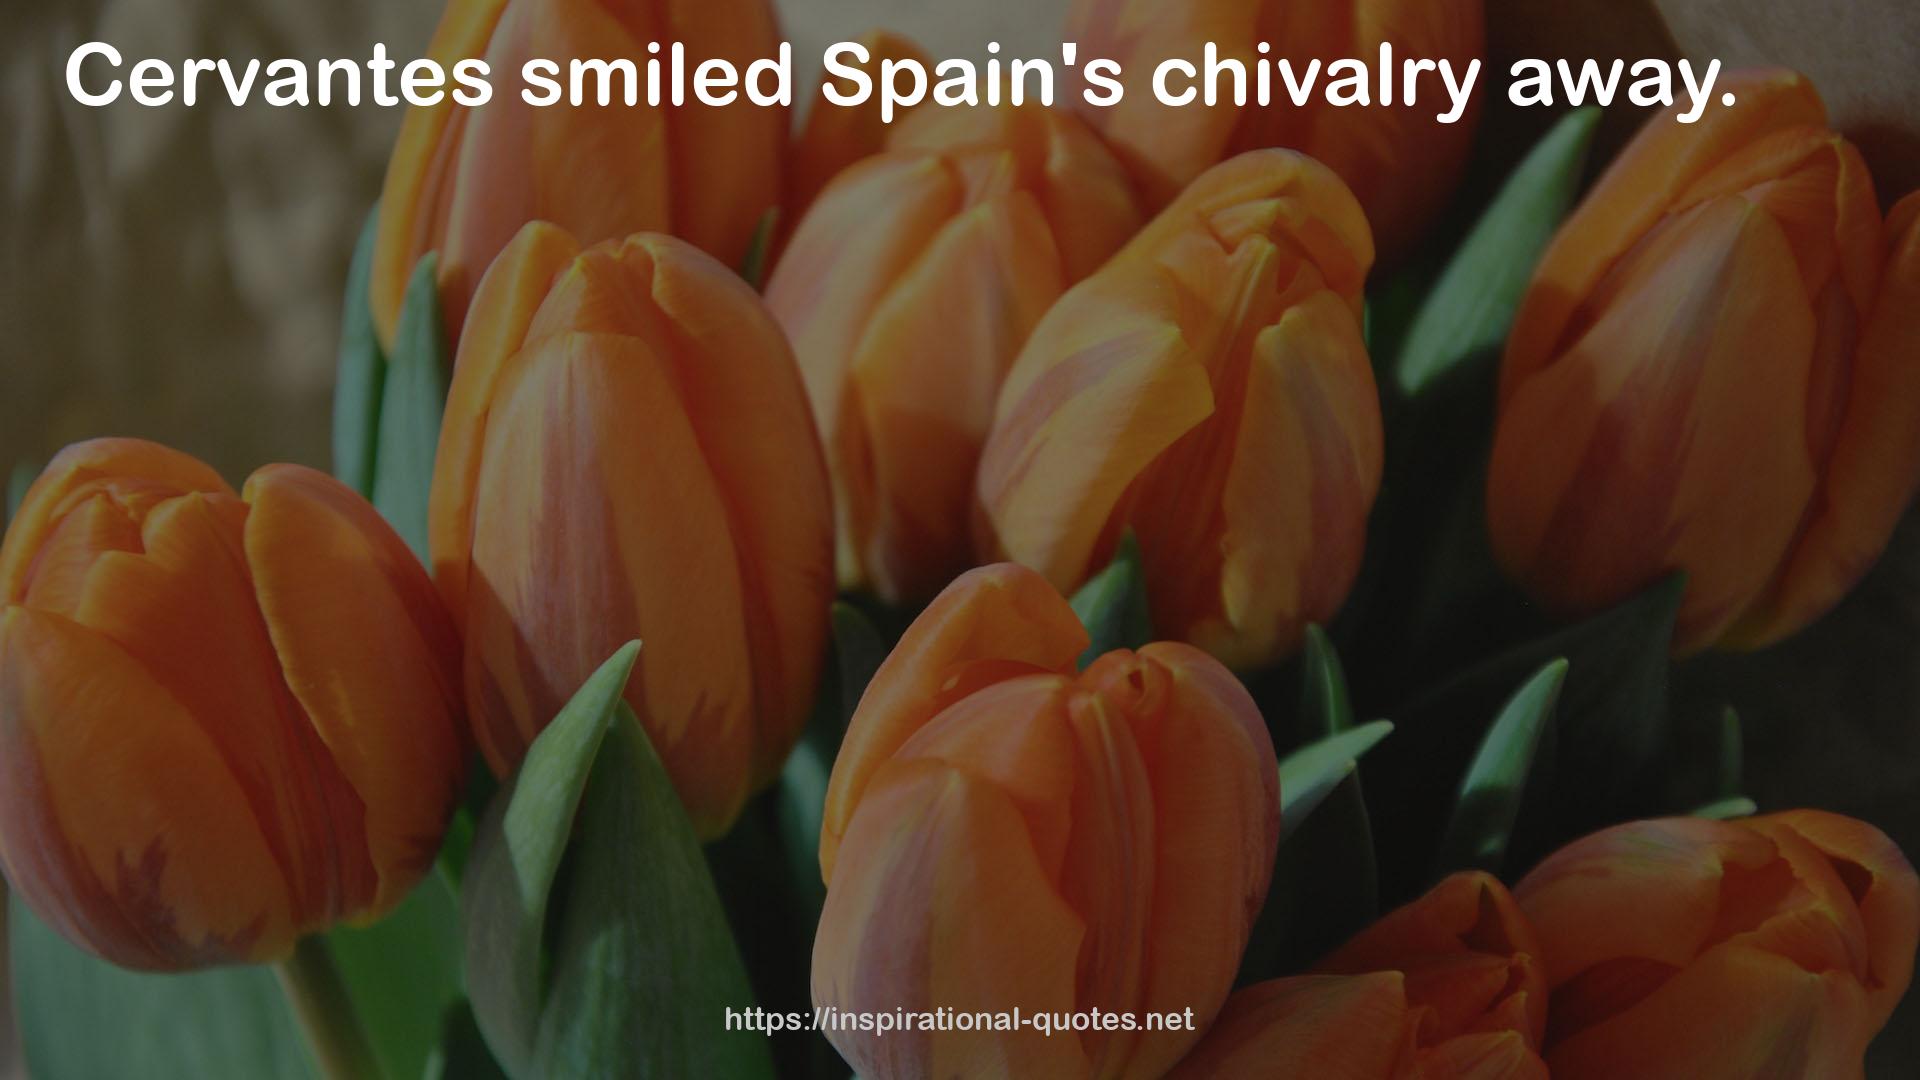 Spain's chivalry  QUOTES